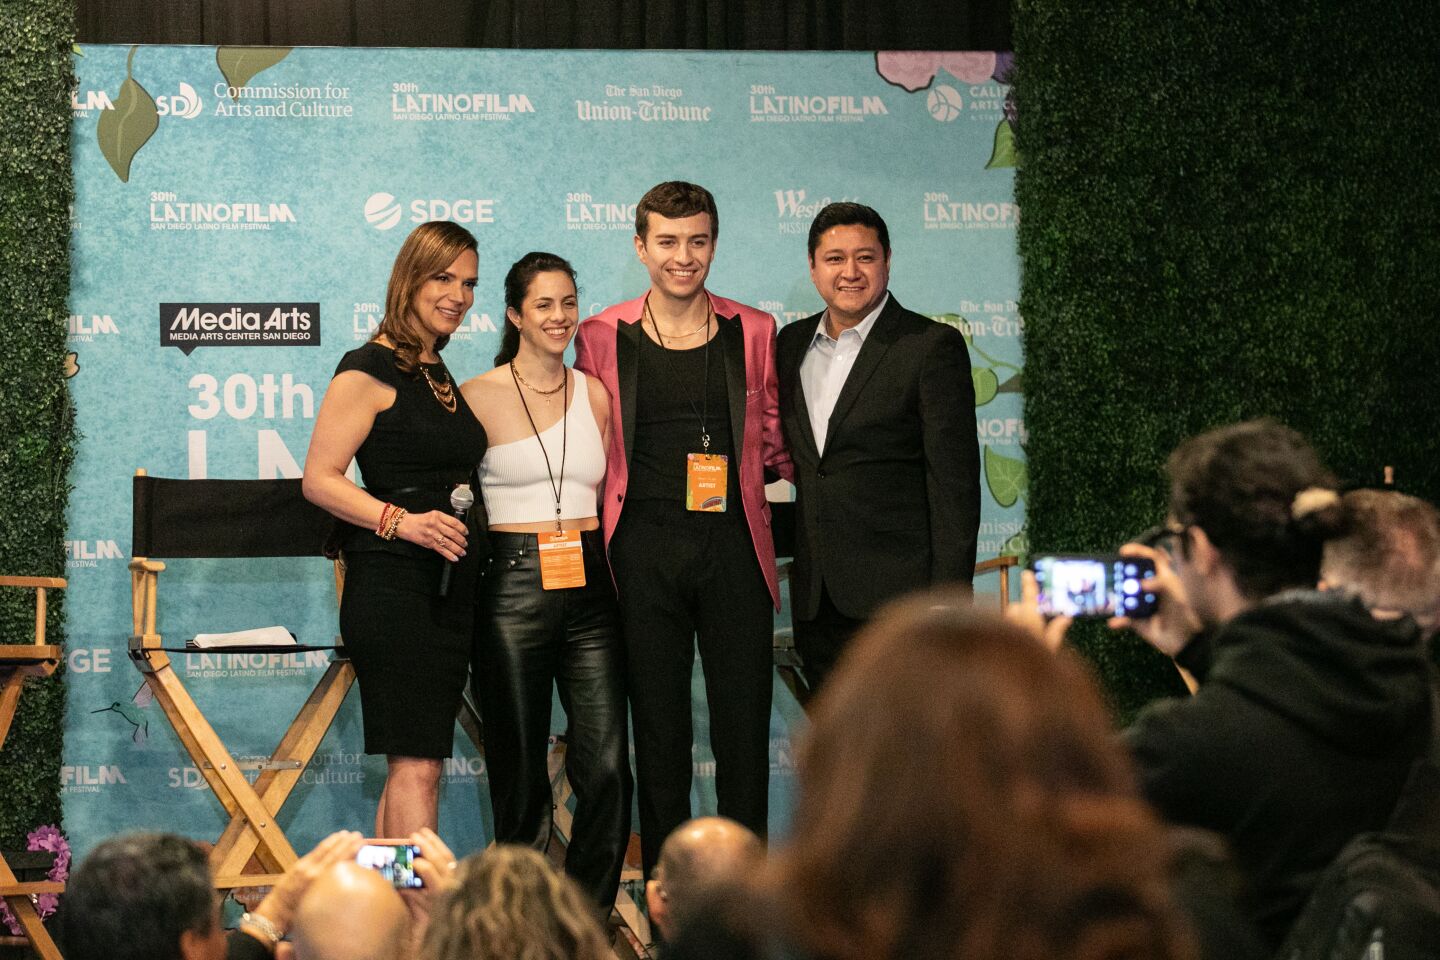 Paola Hernandez-Jiao (far left) and Luis Cruz (second from left) of The San Diego Union-Tribune host a discussion with Fiorella Vescovi (center) and Kyle Selby (far right), filmmakers of Mal de Amores, during opening night of the 30th annual San Diego Latino Film Festival at Westfield Mission Valley Mall in San Diego, CA on Thursday, March 9, 2023.